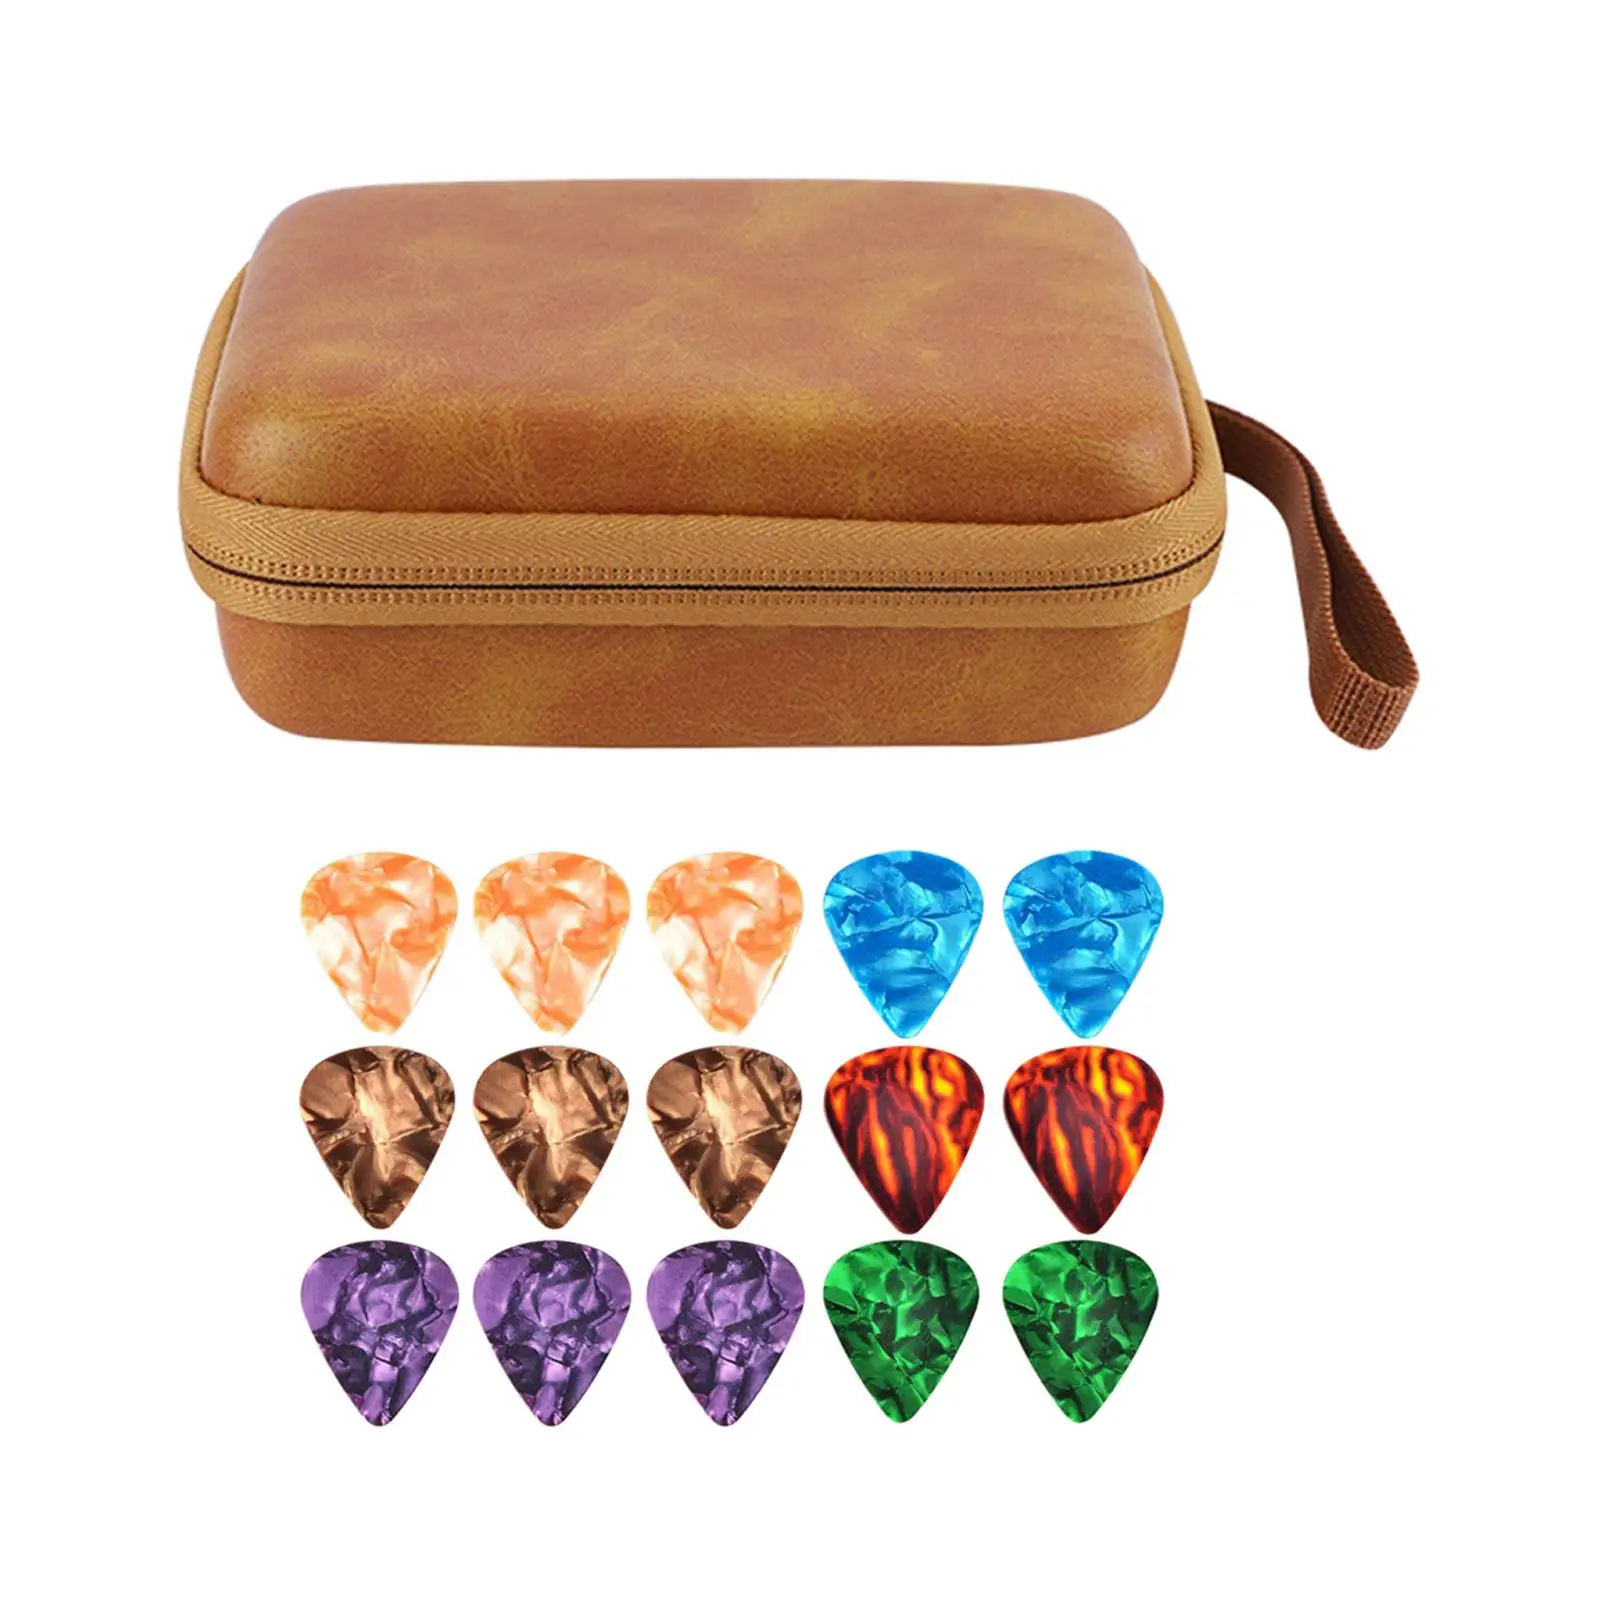 Leather Guitar Picks Holder Case Waterproof for Guitar Player Accessory